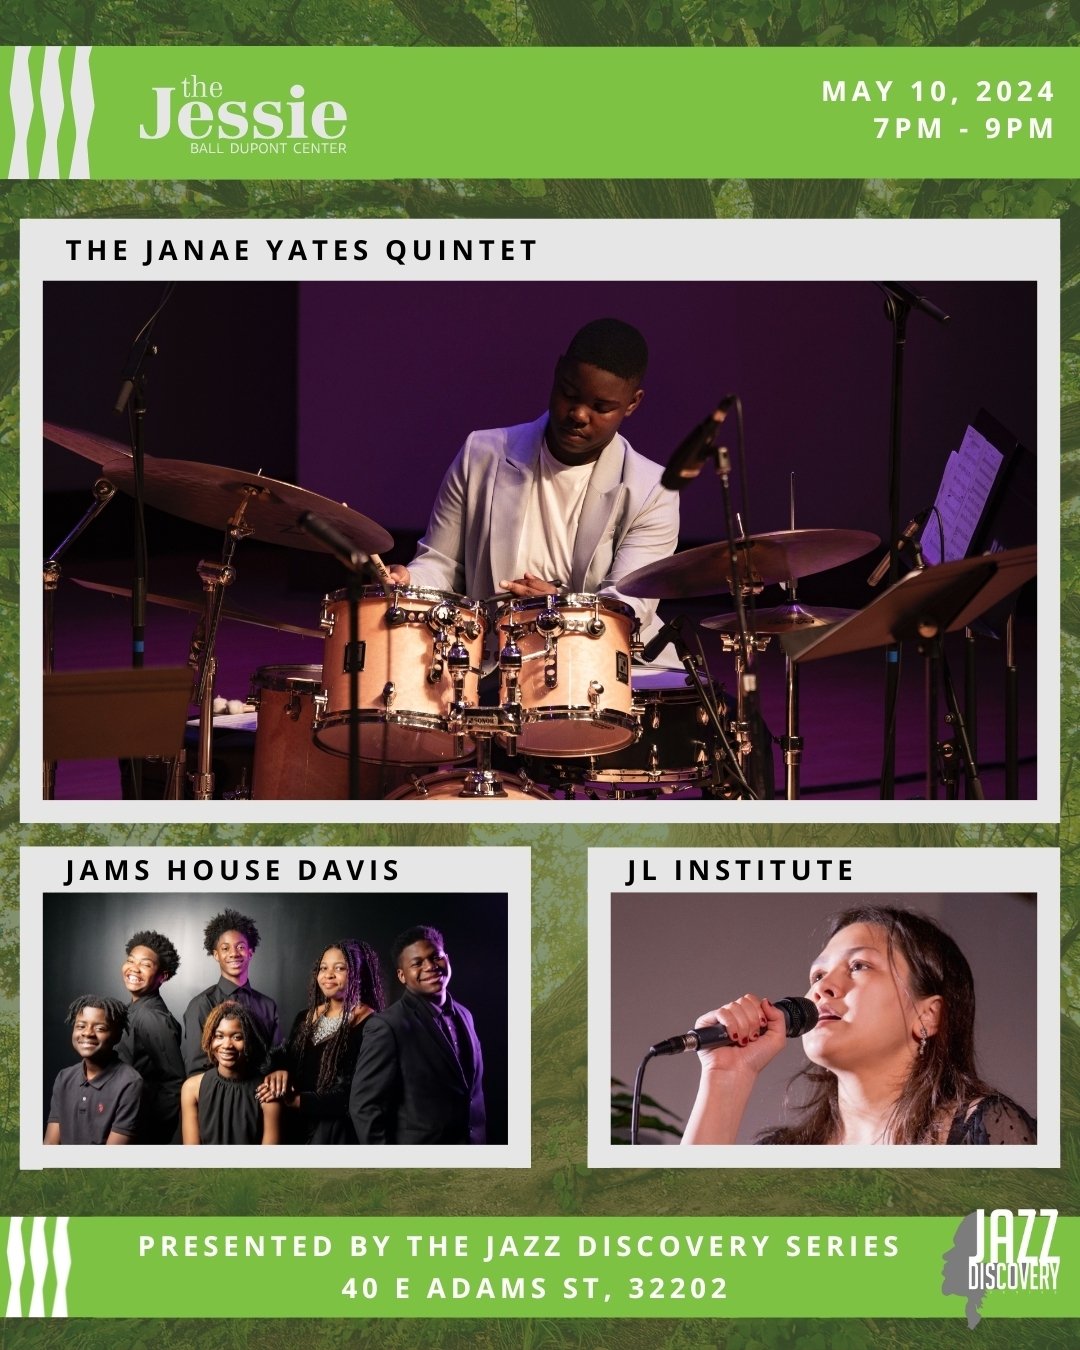 The Jazz Discovery Series presents Jazz at The Jessie featuring Janae Yates Quintet, the JL Institute featuring Courtney Dantzler, and Jacksonville Arts &amp; Music School (JAMS)! Janae Yates, a jazz percussionist and Florida native brings a mix of s